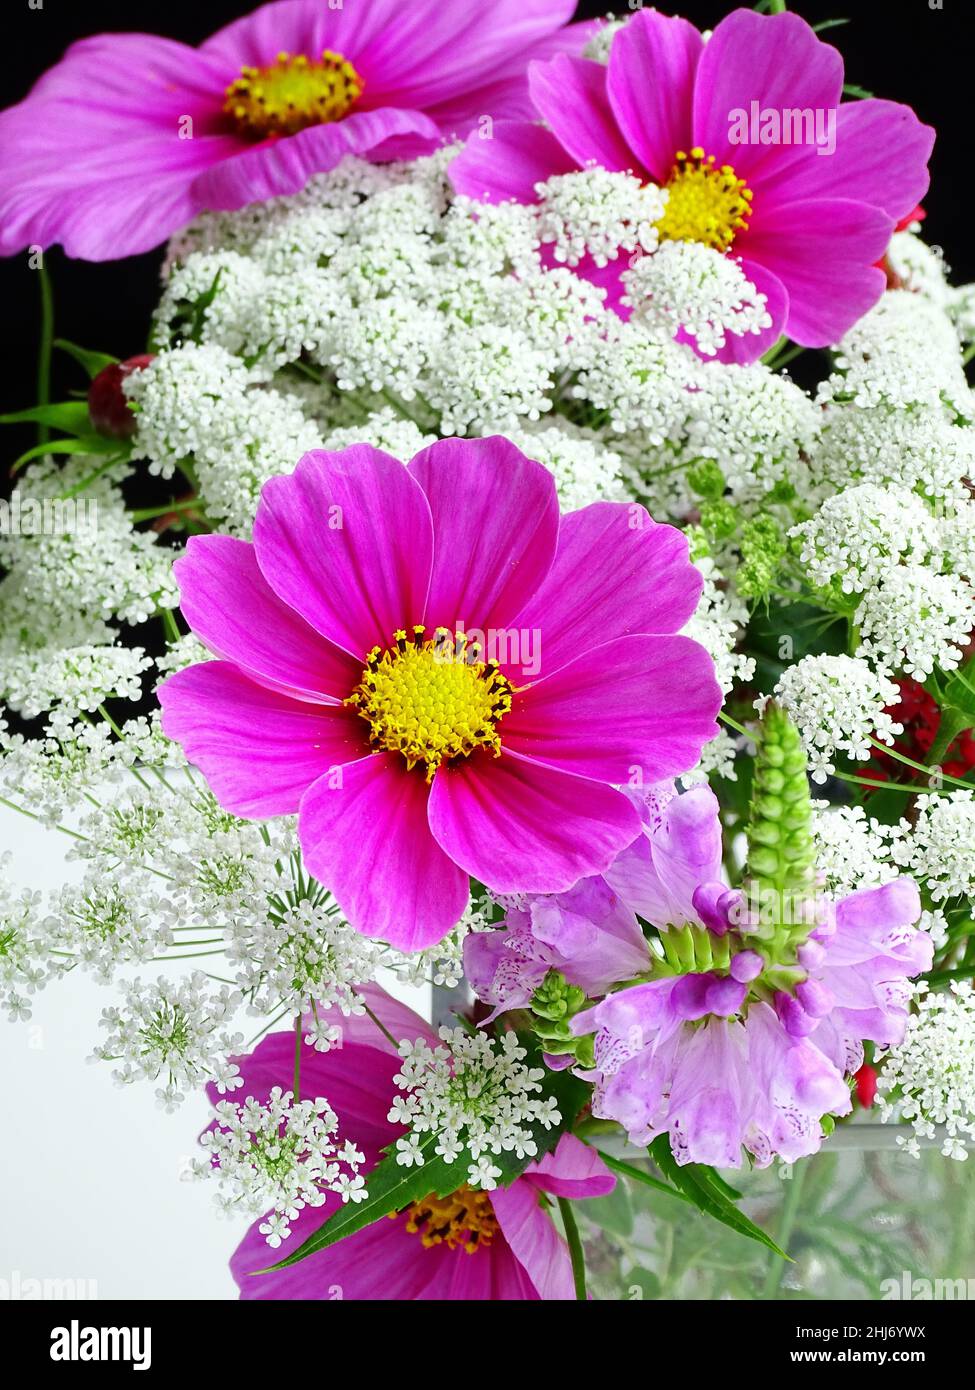 close up of a bouquet of flowers from the garden with silver dill (AMMI MAJUS) and pink cosmos (cosmea), with colors pink, and white Stock Photo